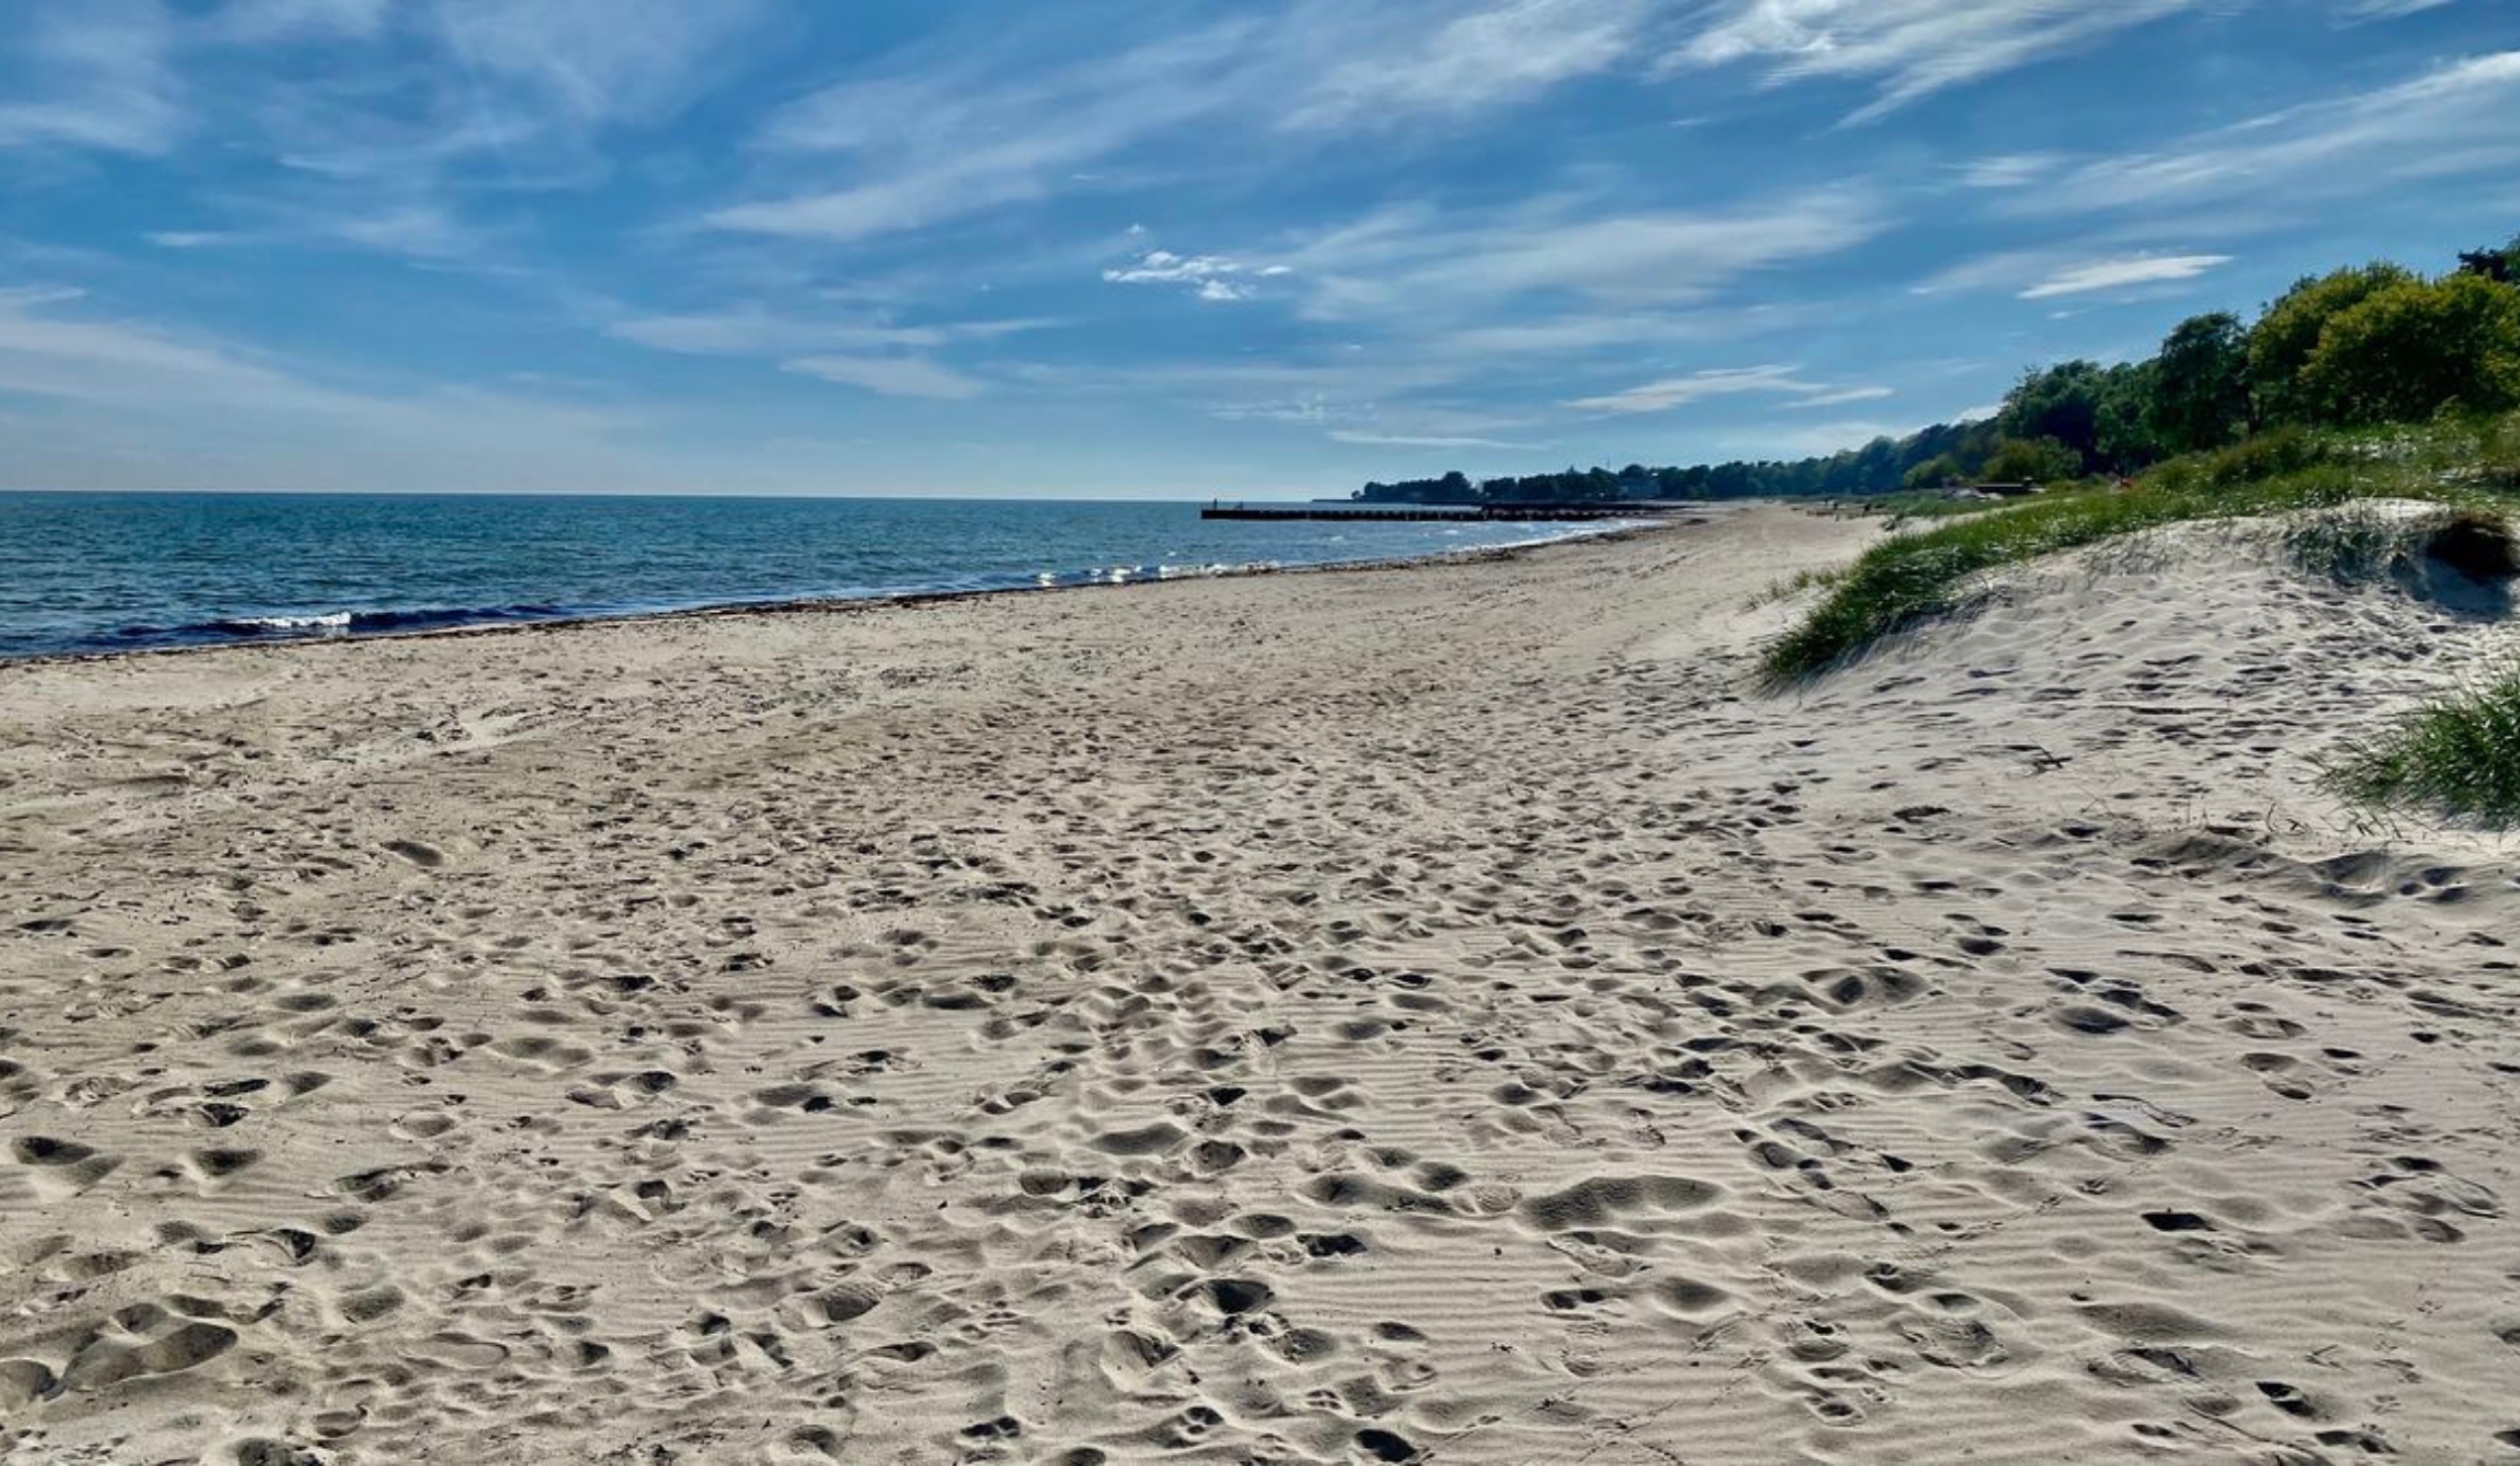 Right next to Ystad Camping, you will find a nice sandy beach.